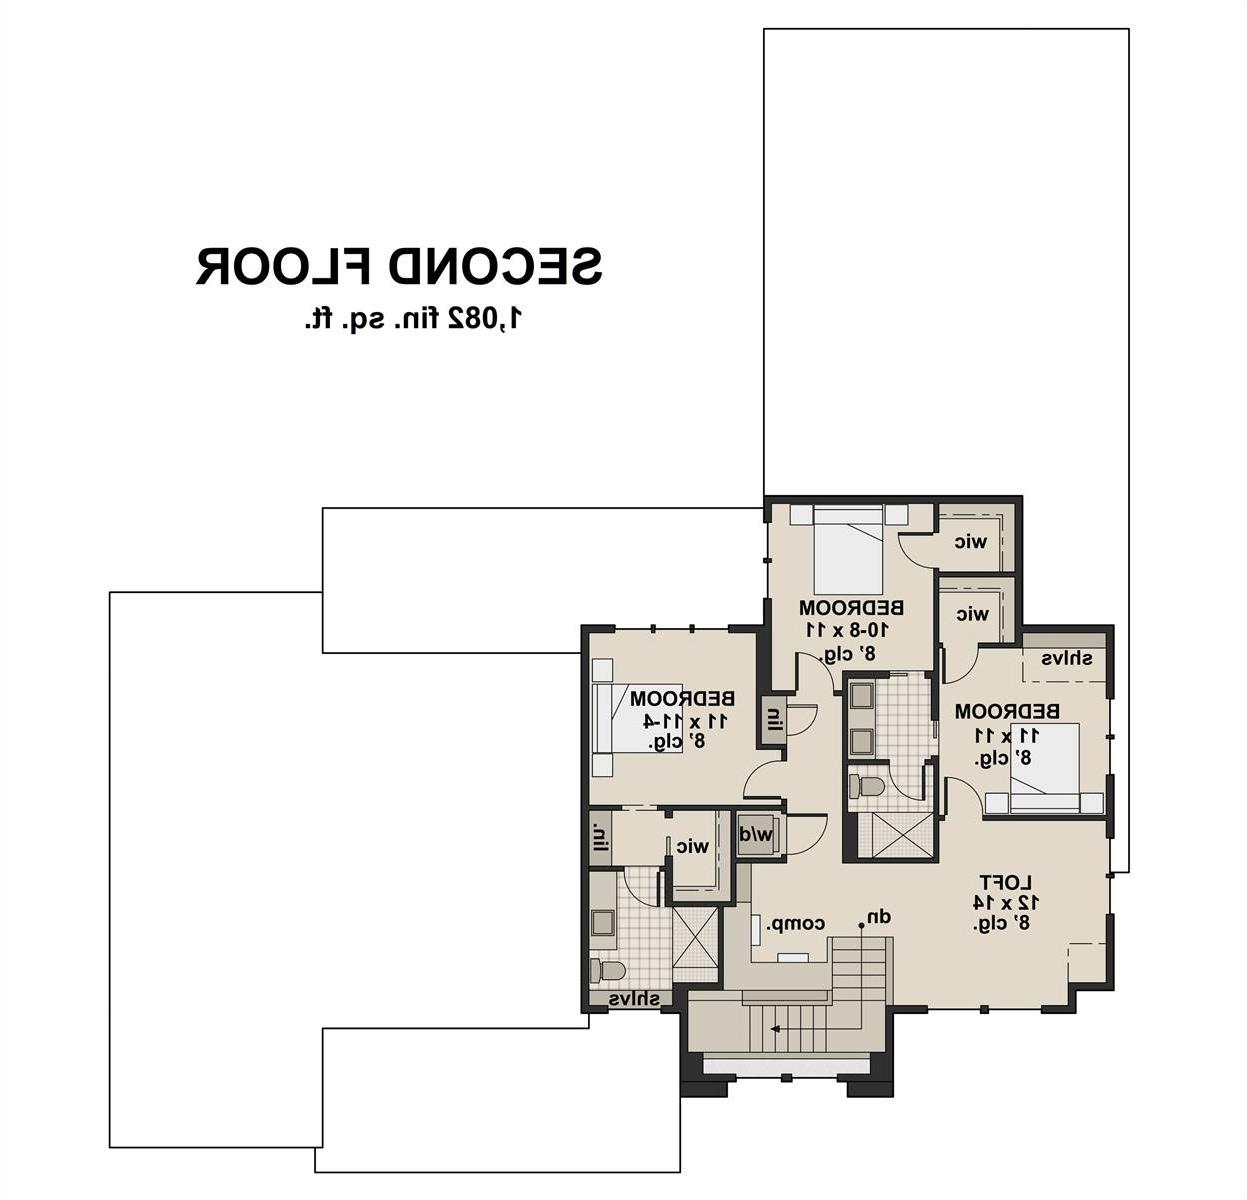 2nd Floor Plan image of The Durham House Plan